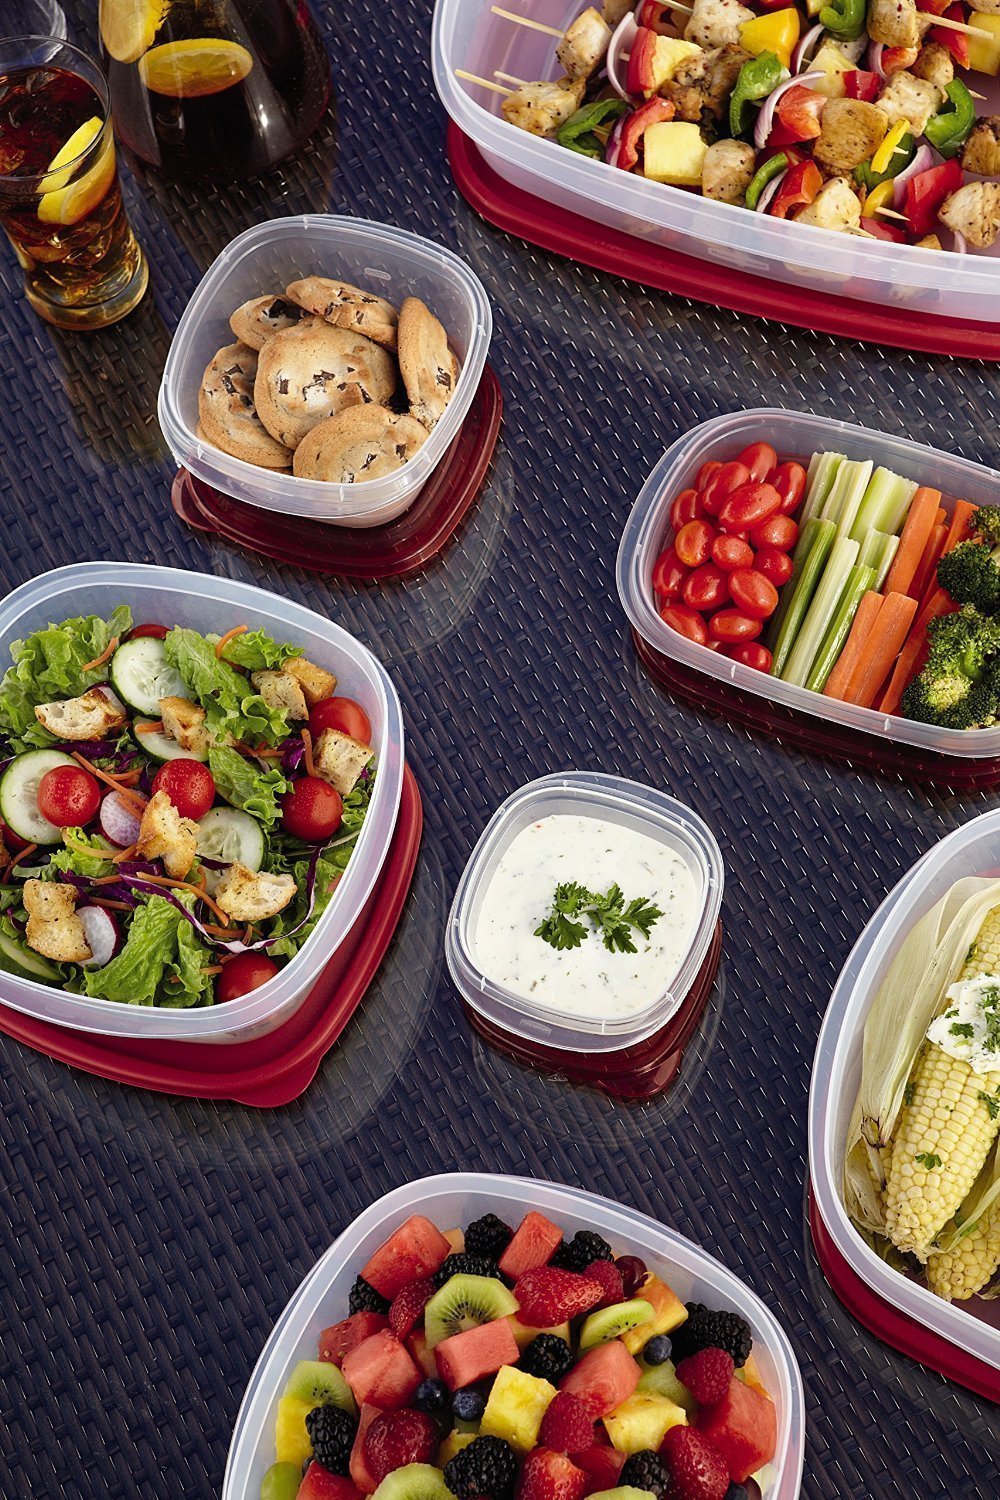 42-piece Rubbermaid Easy Find Lids food storage container set for $16